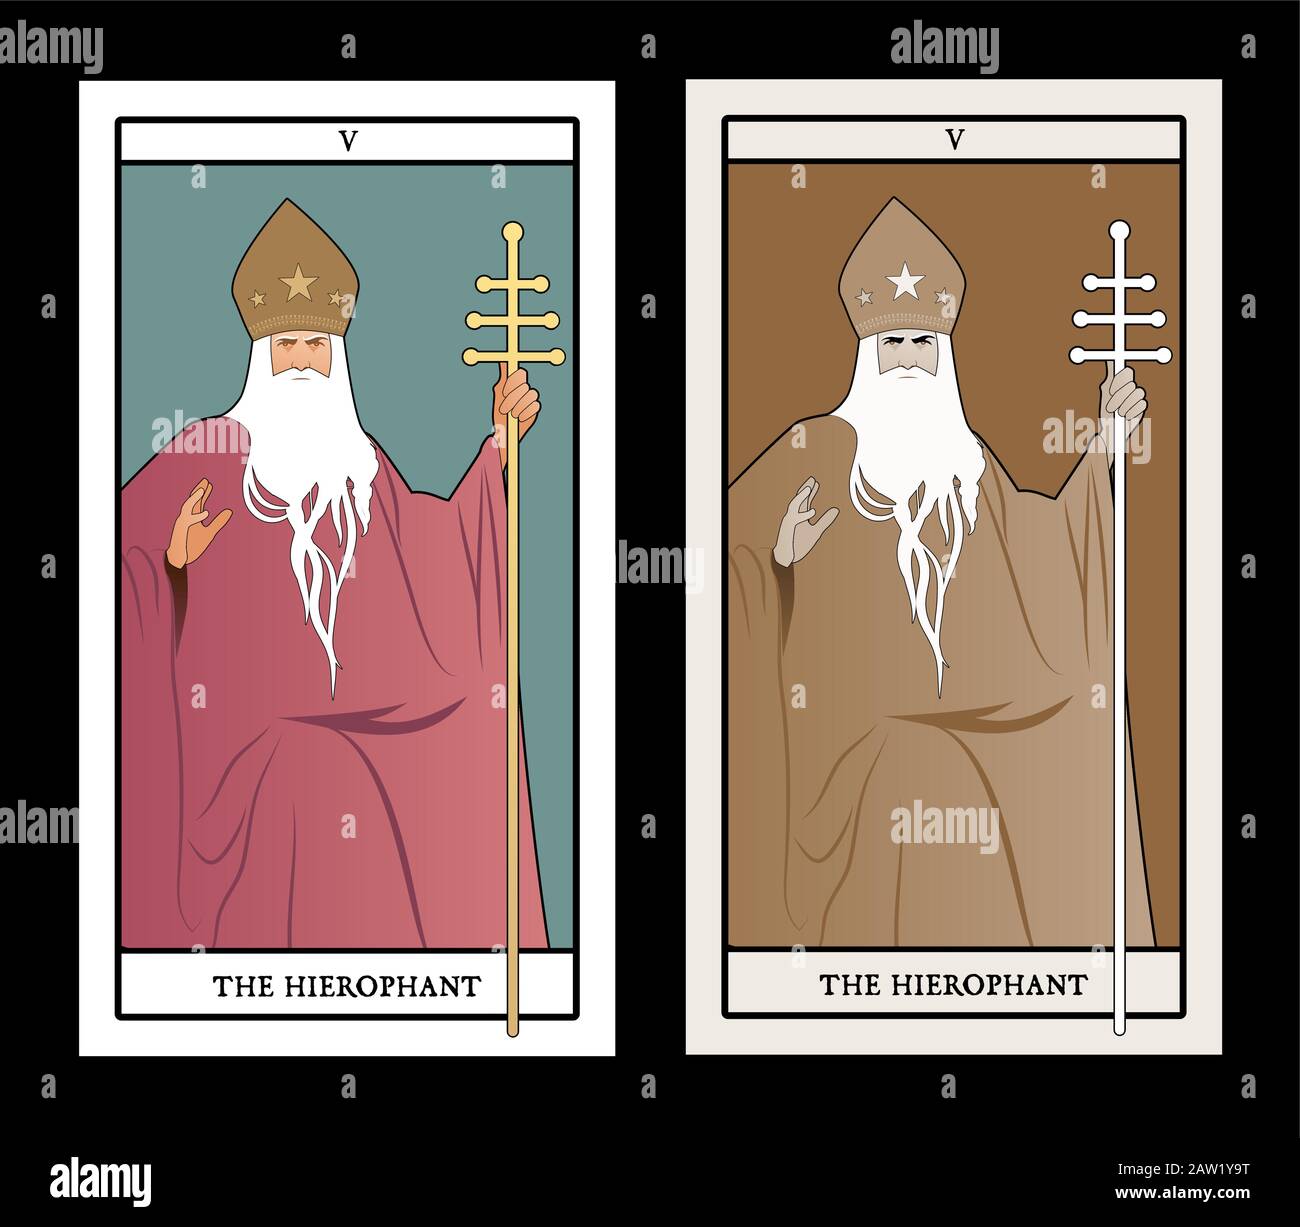 Major Arcana Tarot Cards. The Hierophant. Pope with white beard and miter with stars, holding a golden crosier, blessing with his right hand Stock Vector